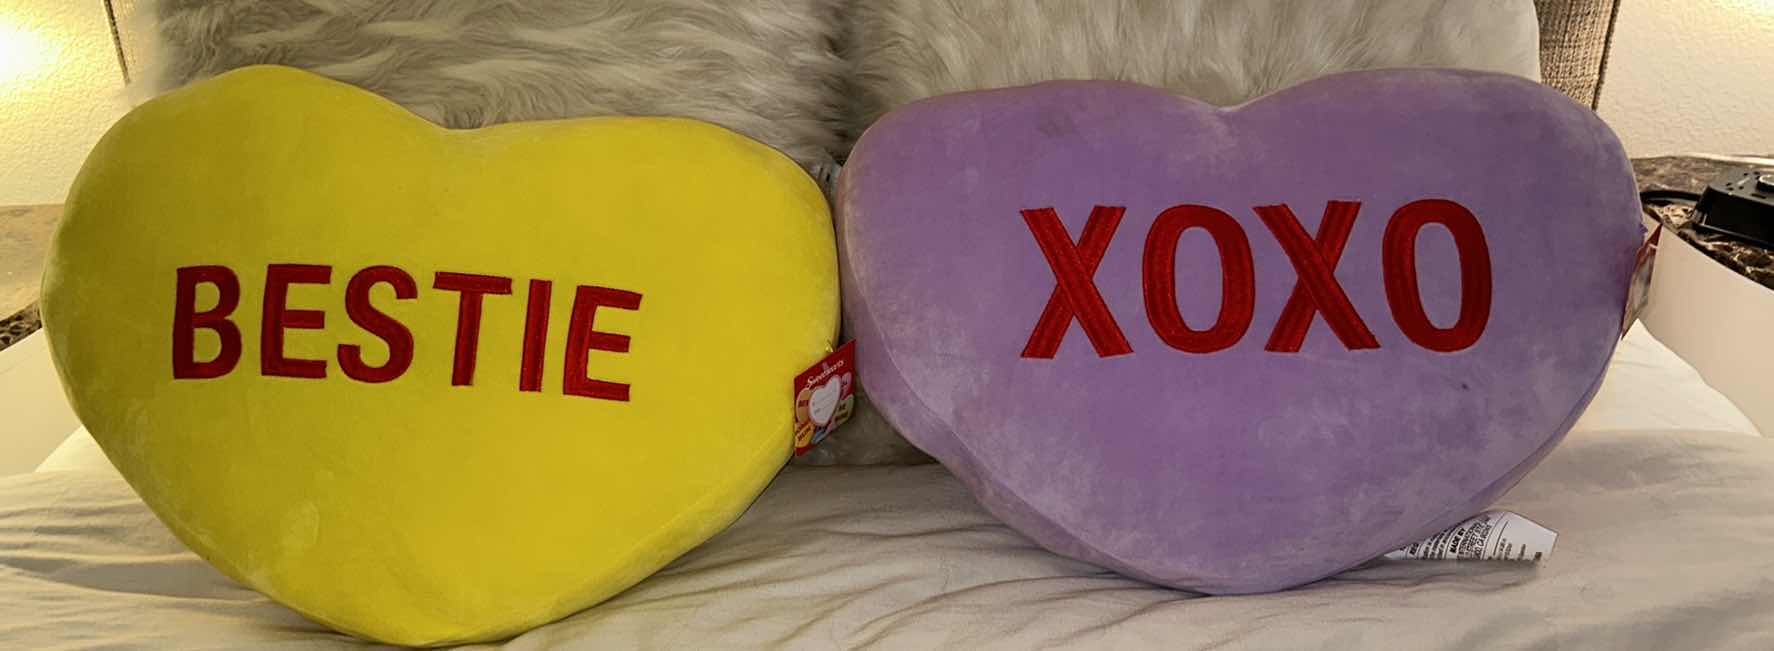 Photo 5 of TWO NEW SUPER SOFT SQUISHY SWEETHEART PILLOWS 22” x 15”